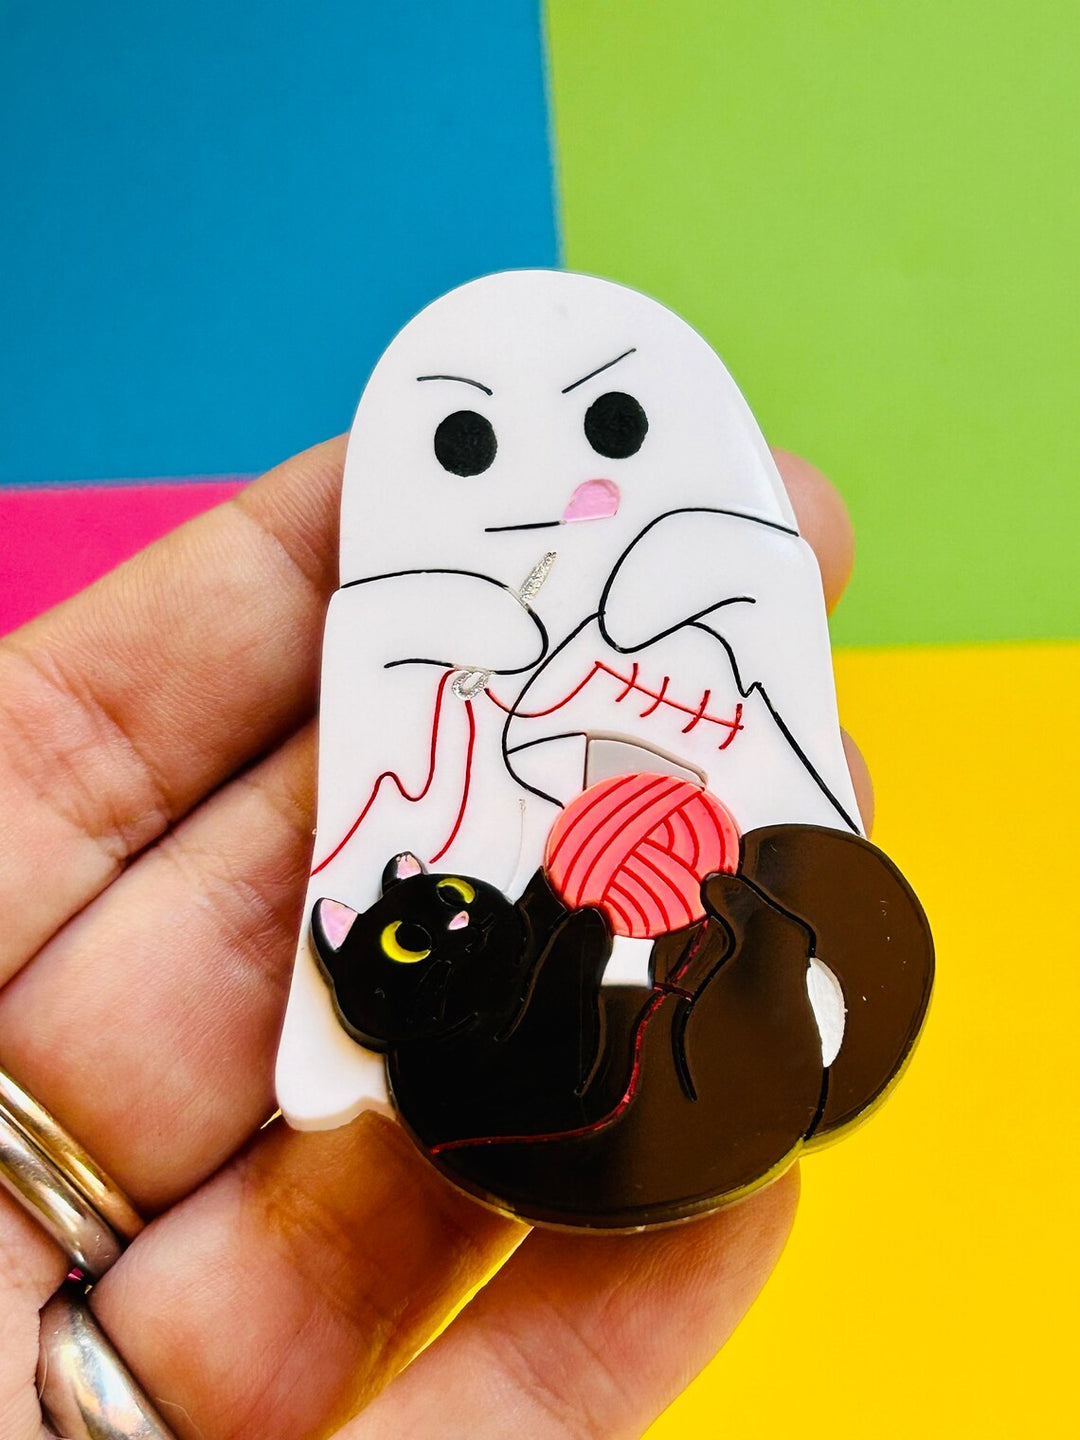 Adopt a Cat, They Said.. Pt.2 - Sewing Problems Acrylic Brooch by Makokot Design